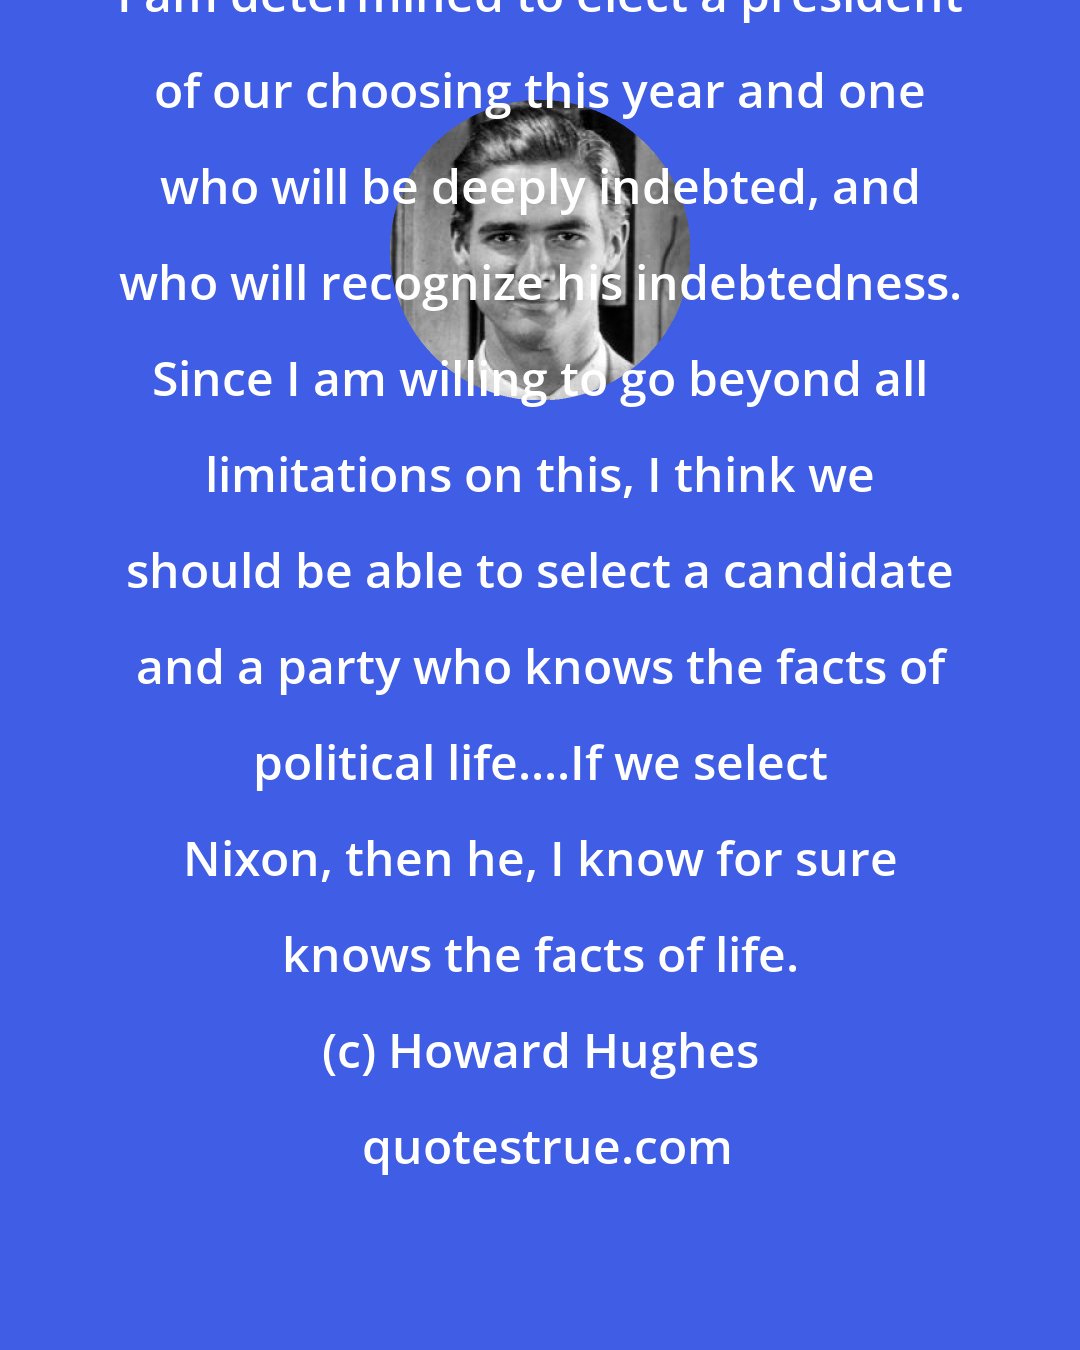 Howard Hughes: I am determined to elect a president of our choosing this year and one who will be deeply indebted, and who will recognize his indebtedness. Since I am willing to go beyond all limitations on this, I think we should be able to select a candidate and a party who knows the facts of political life....If we select Nixon, then he, I know for sure knows the facts of life.